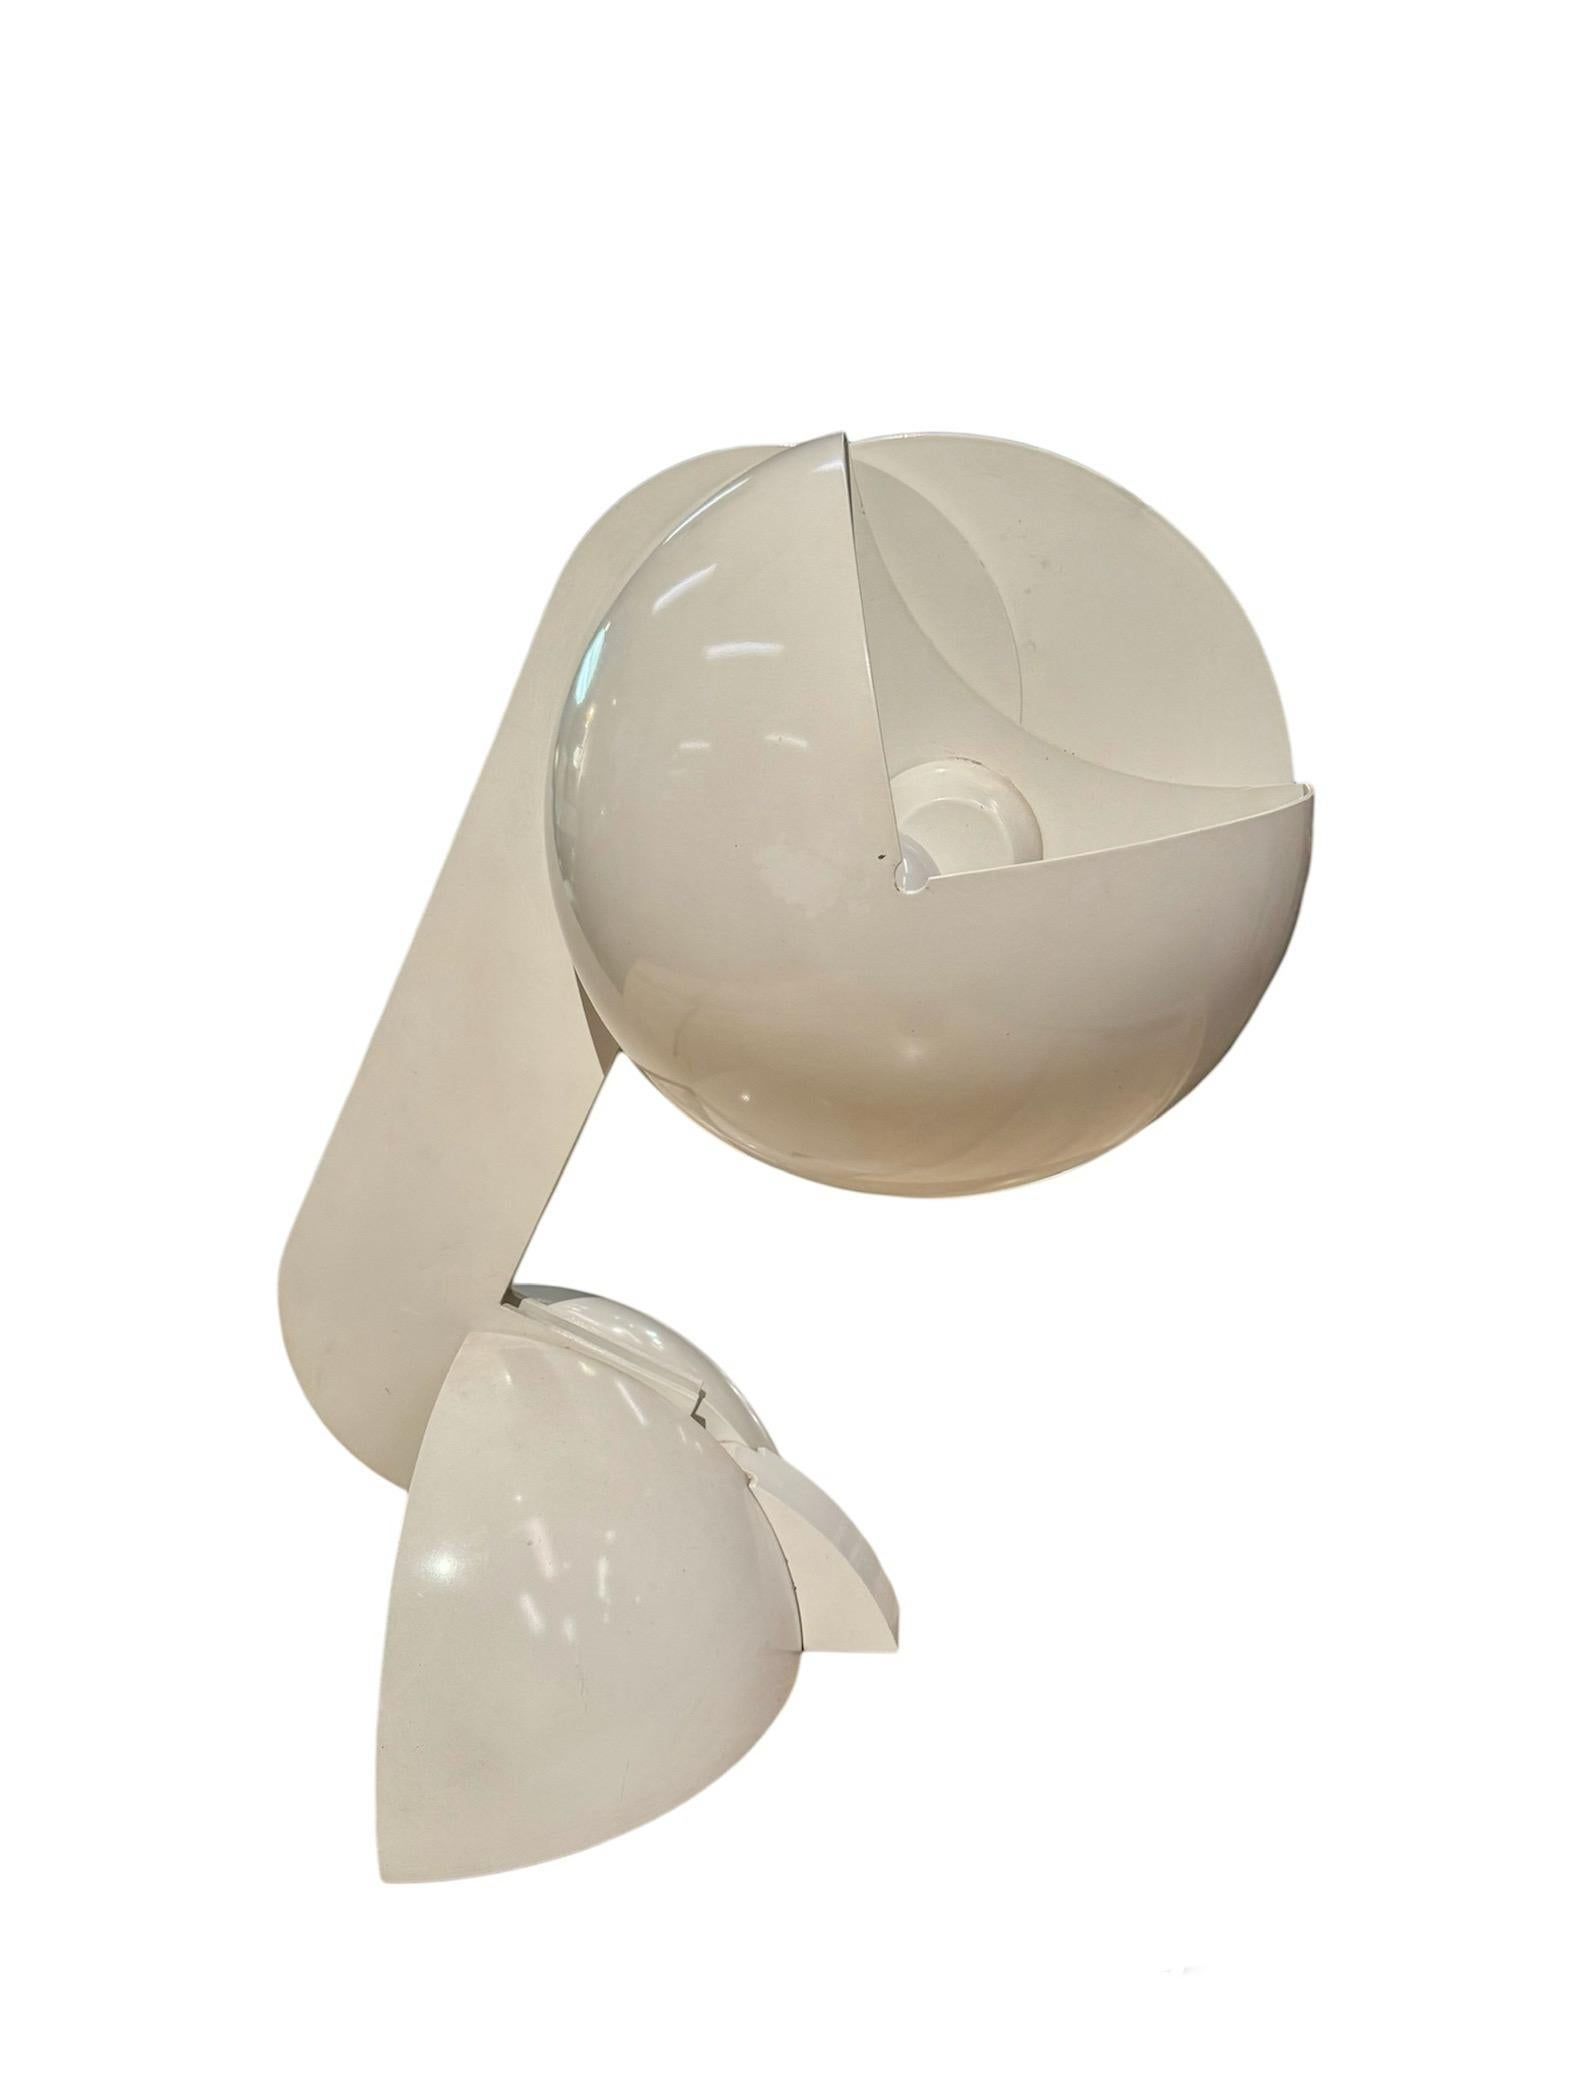 Post-Modern Gae Aulenti early edition of the Ruspa table lamp